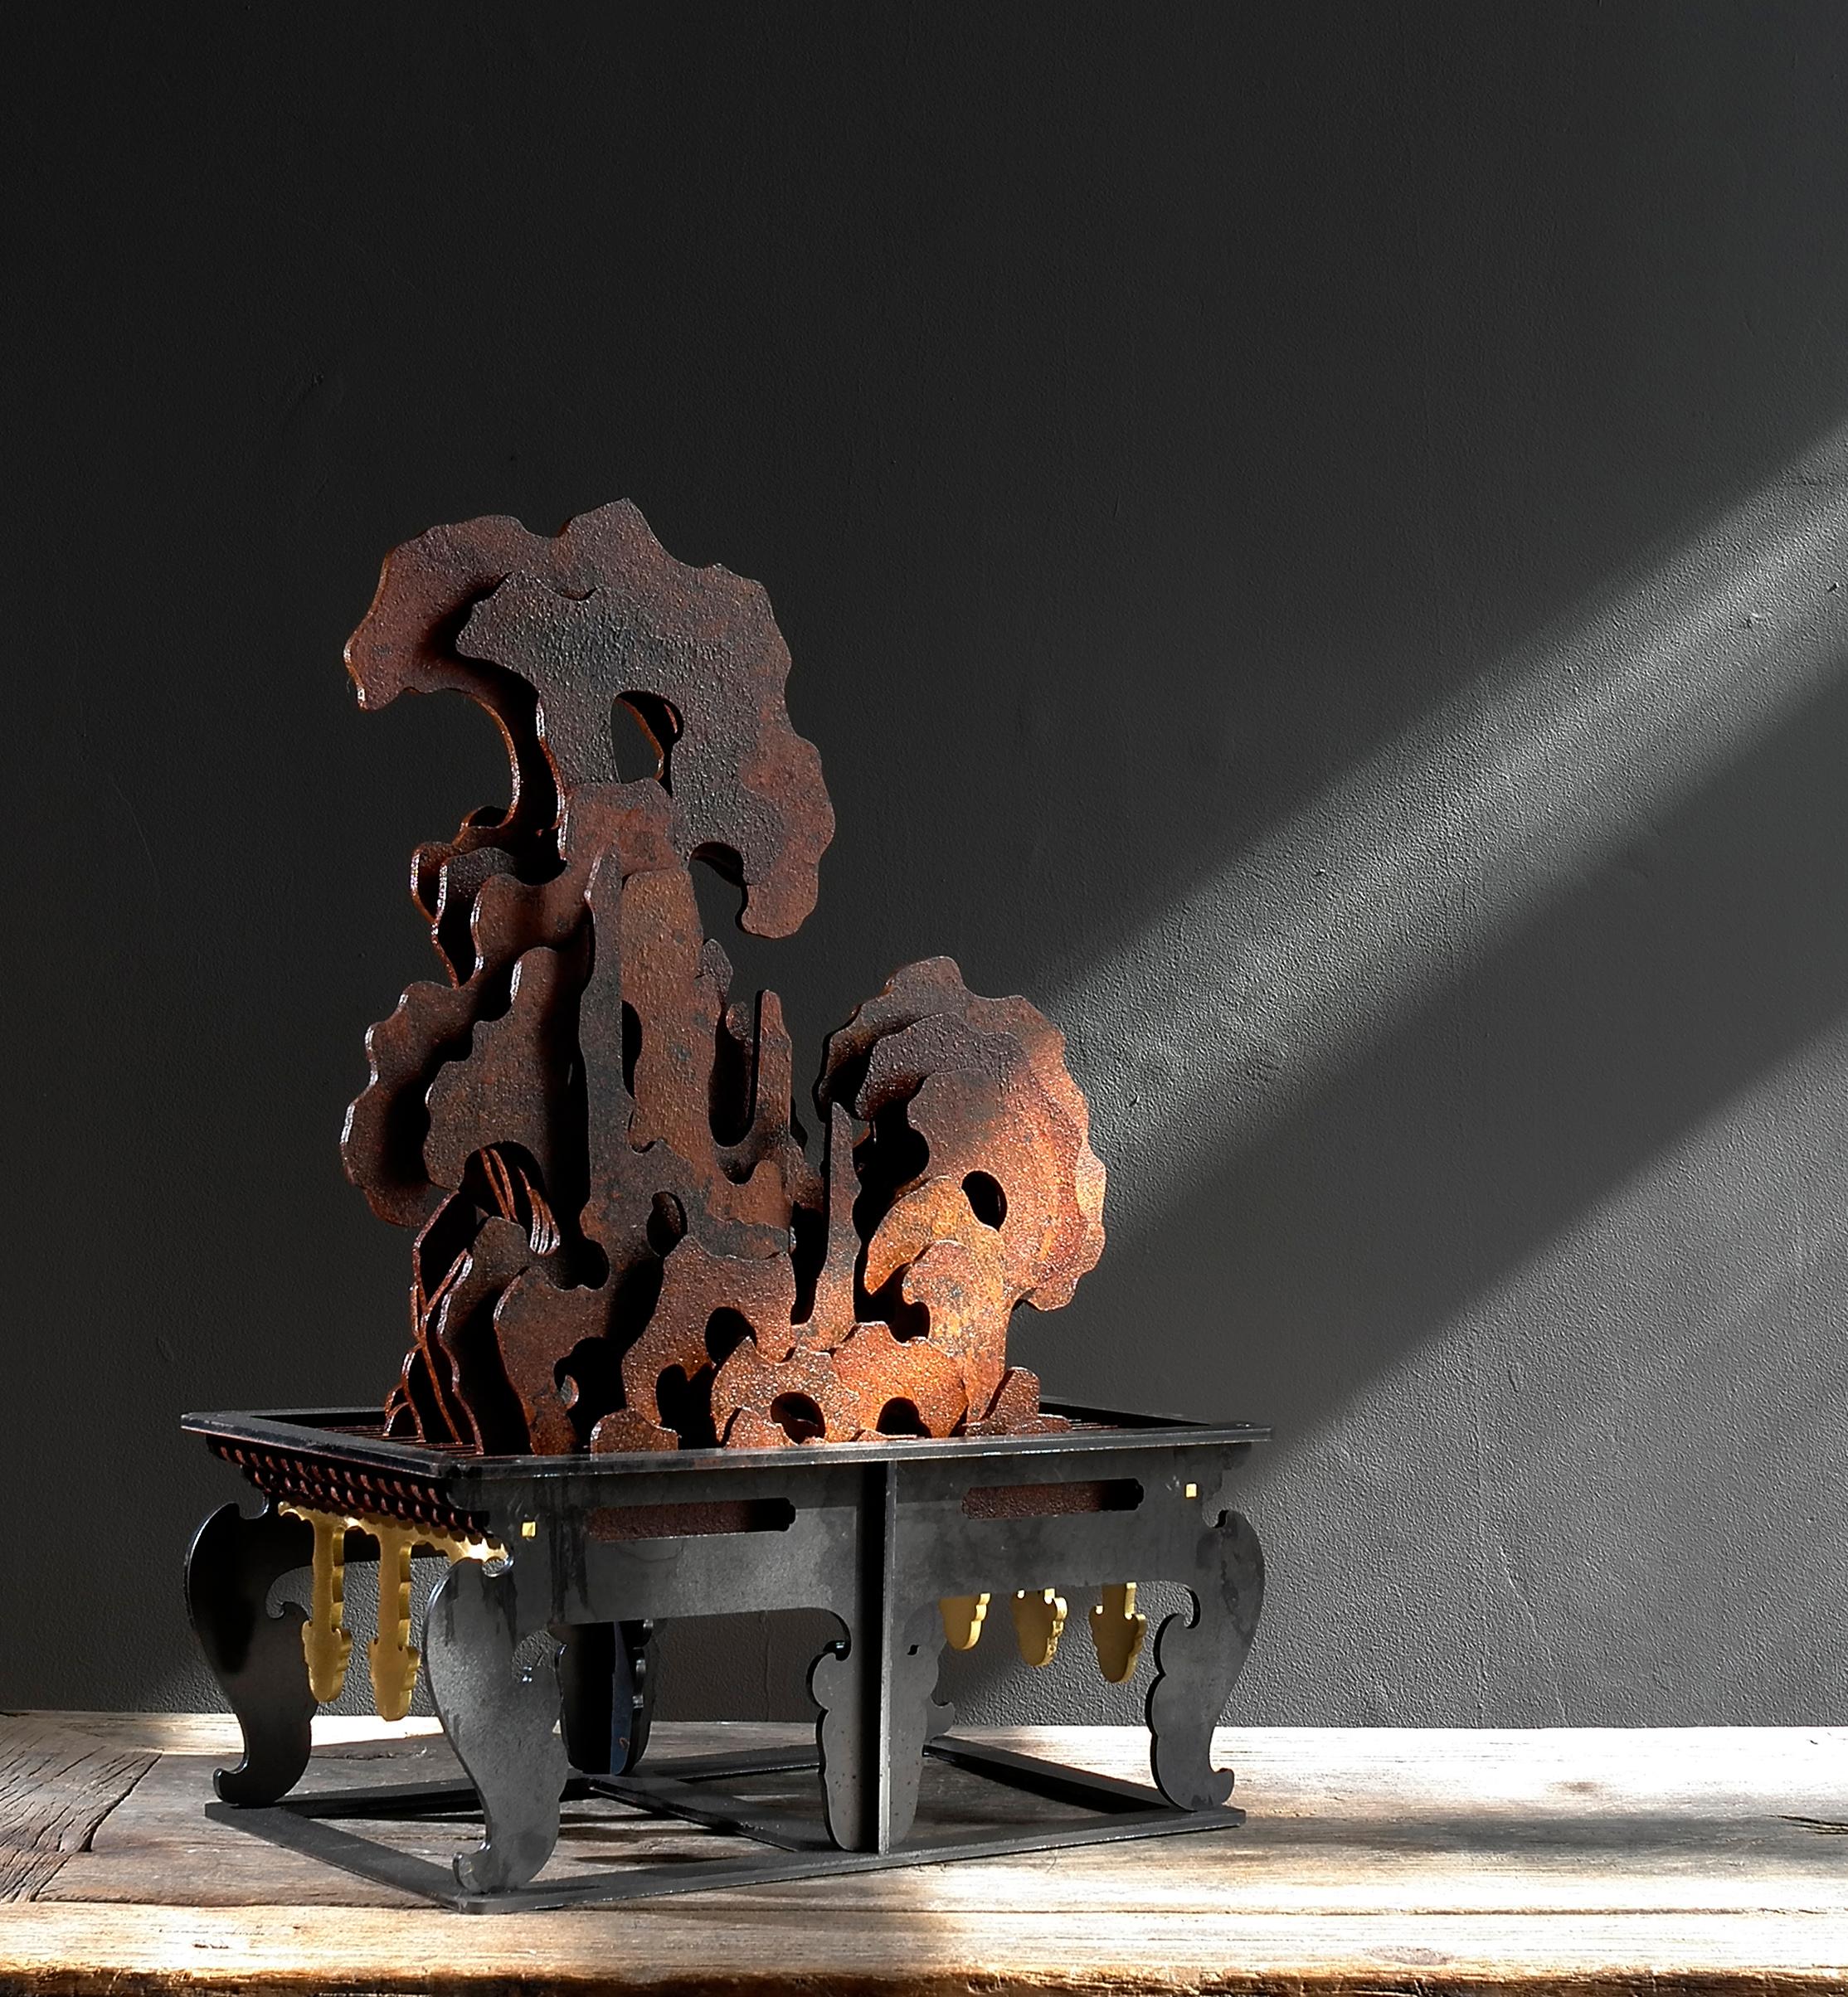 Artist: Yang Dongying
Title: Modern Impressive Super-Flat Sculpture- Series Table on Table No.3
Date:2019
Material: Iron, Copper Pigment 
Dimension : 38.5 x 21.6 x 52.1 cm 
Edition: 2 / 8

Yang Dongying is known for his “Super-flat” sculpture.